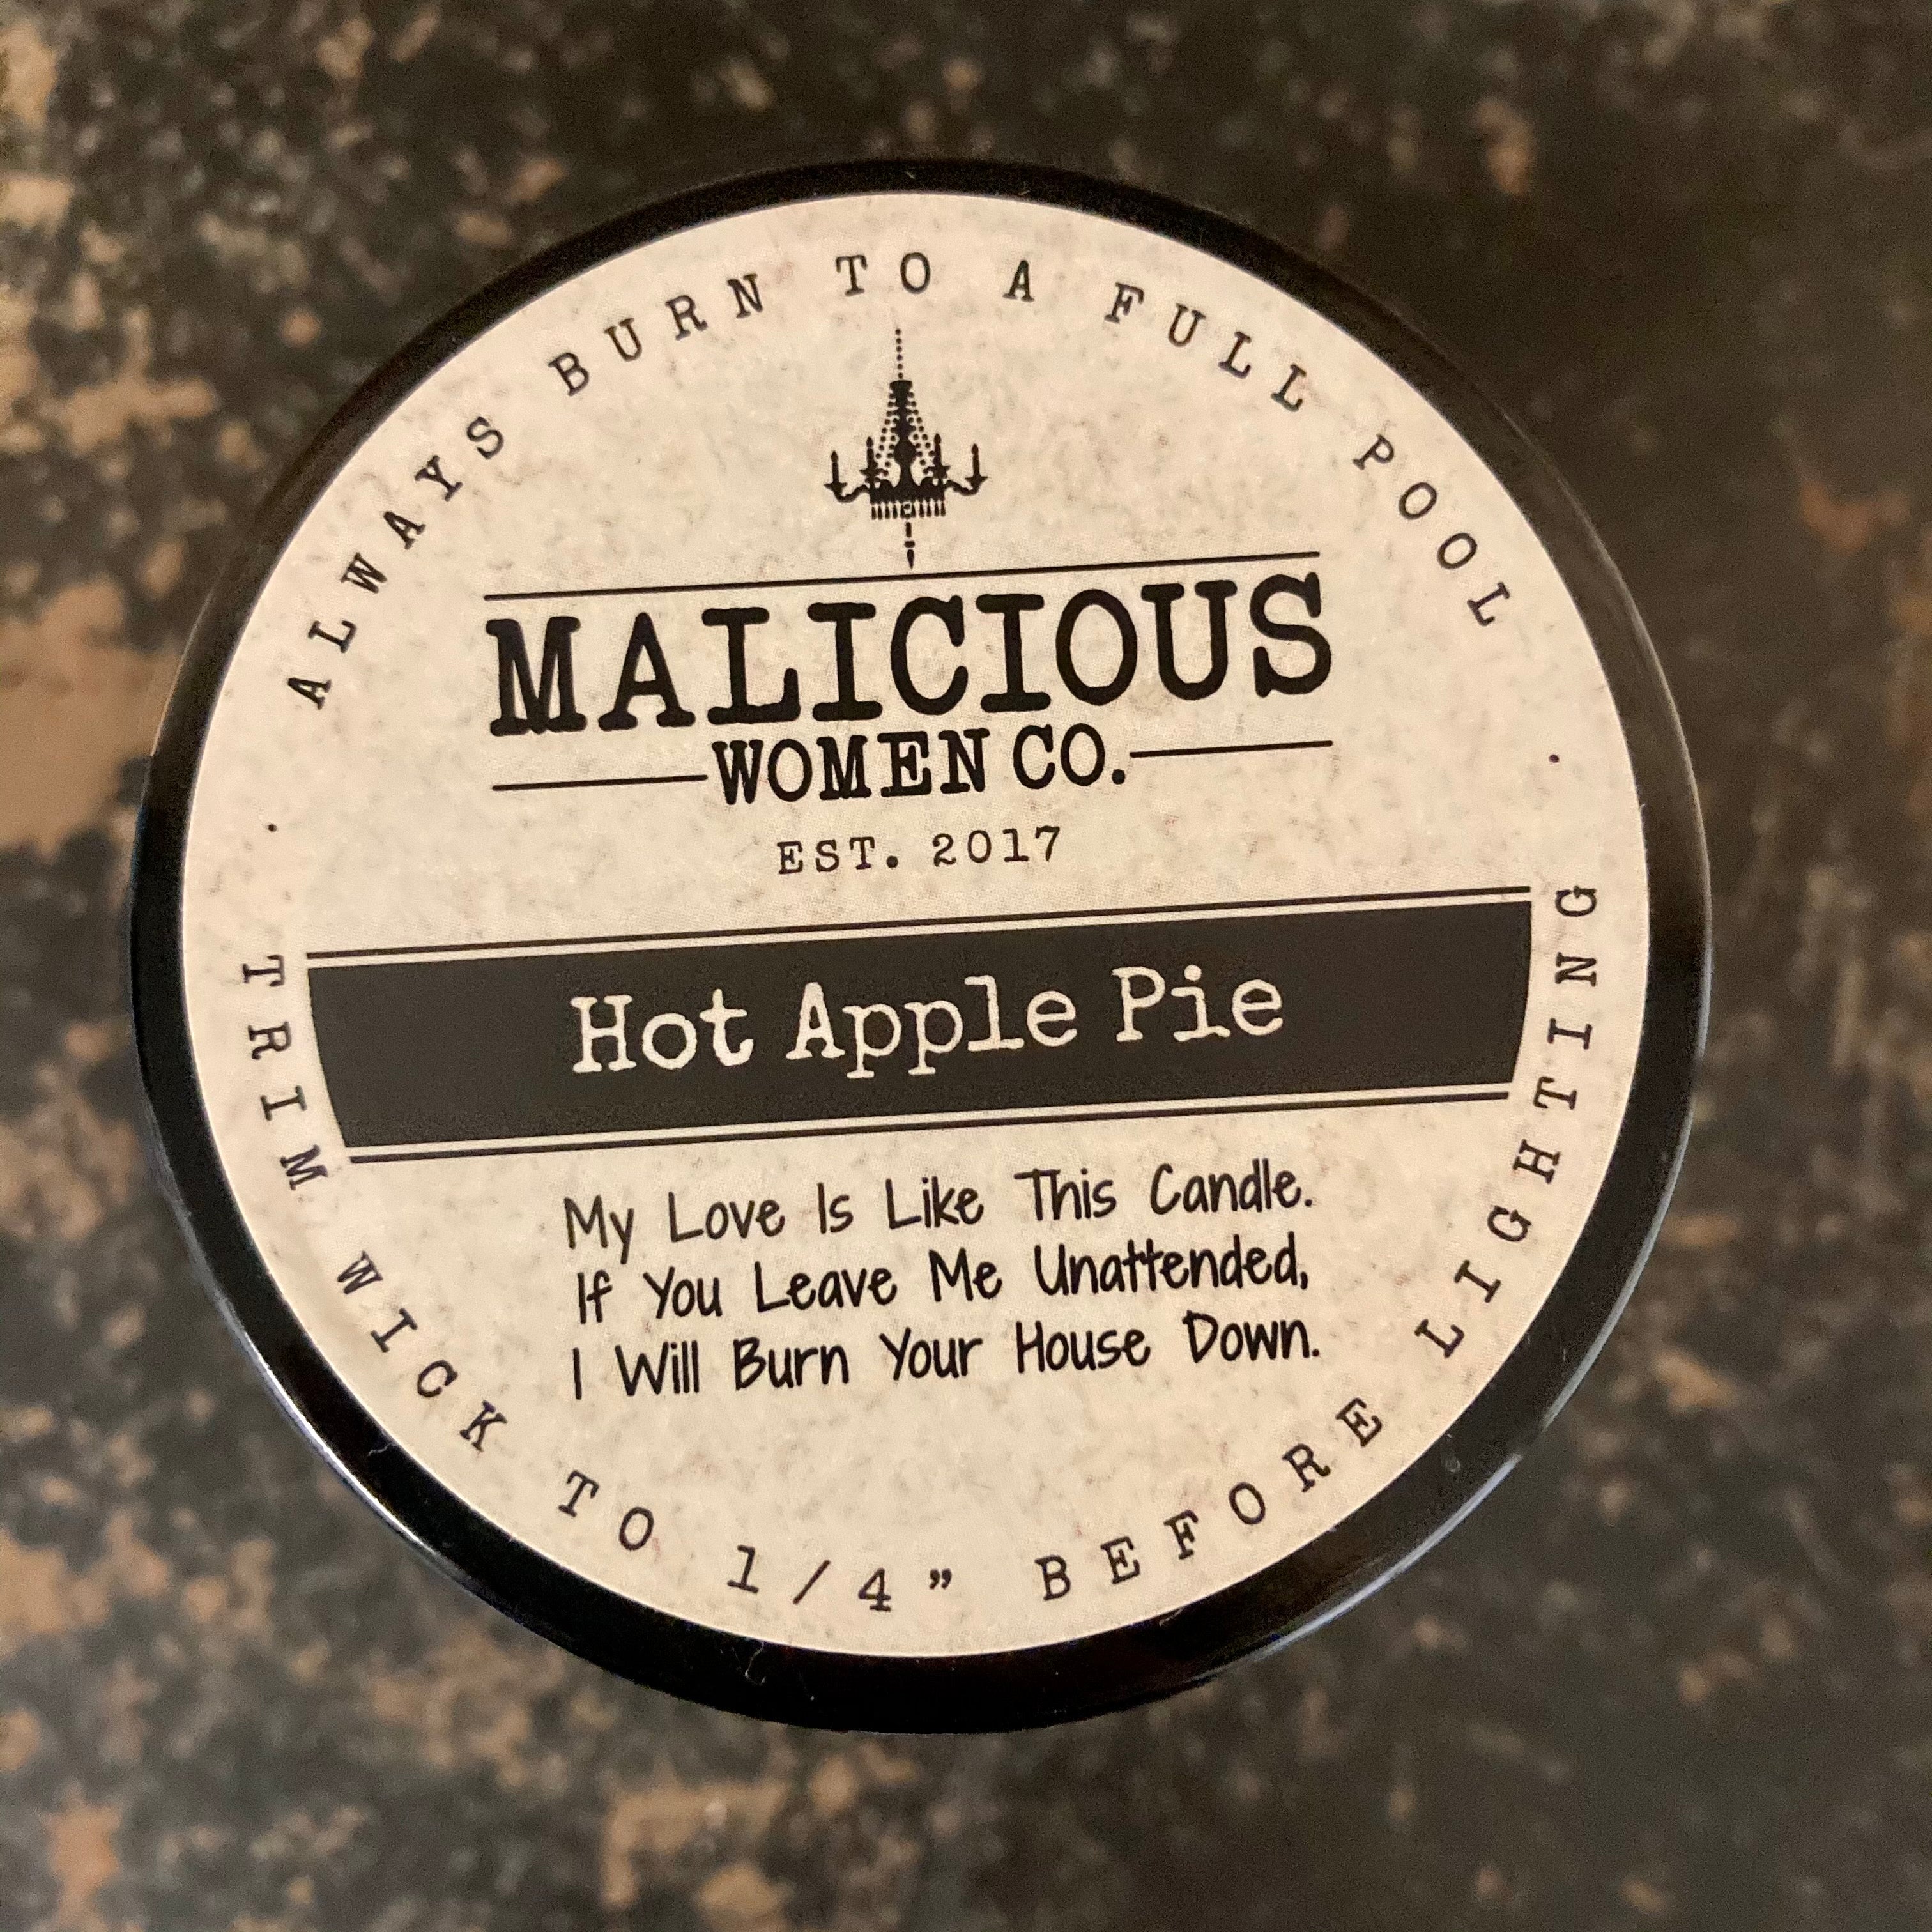 Seasonal Depression (It's Like Regular Depression, But With Holidays & Sh*t) - Infused With: "Eating An Entire Pie... By Yourself... In the Dark. | Scent: Hot Apple Pie